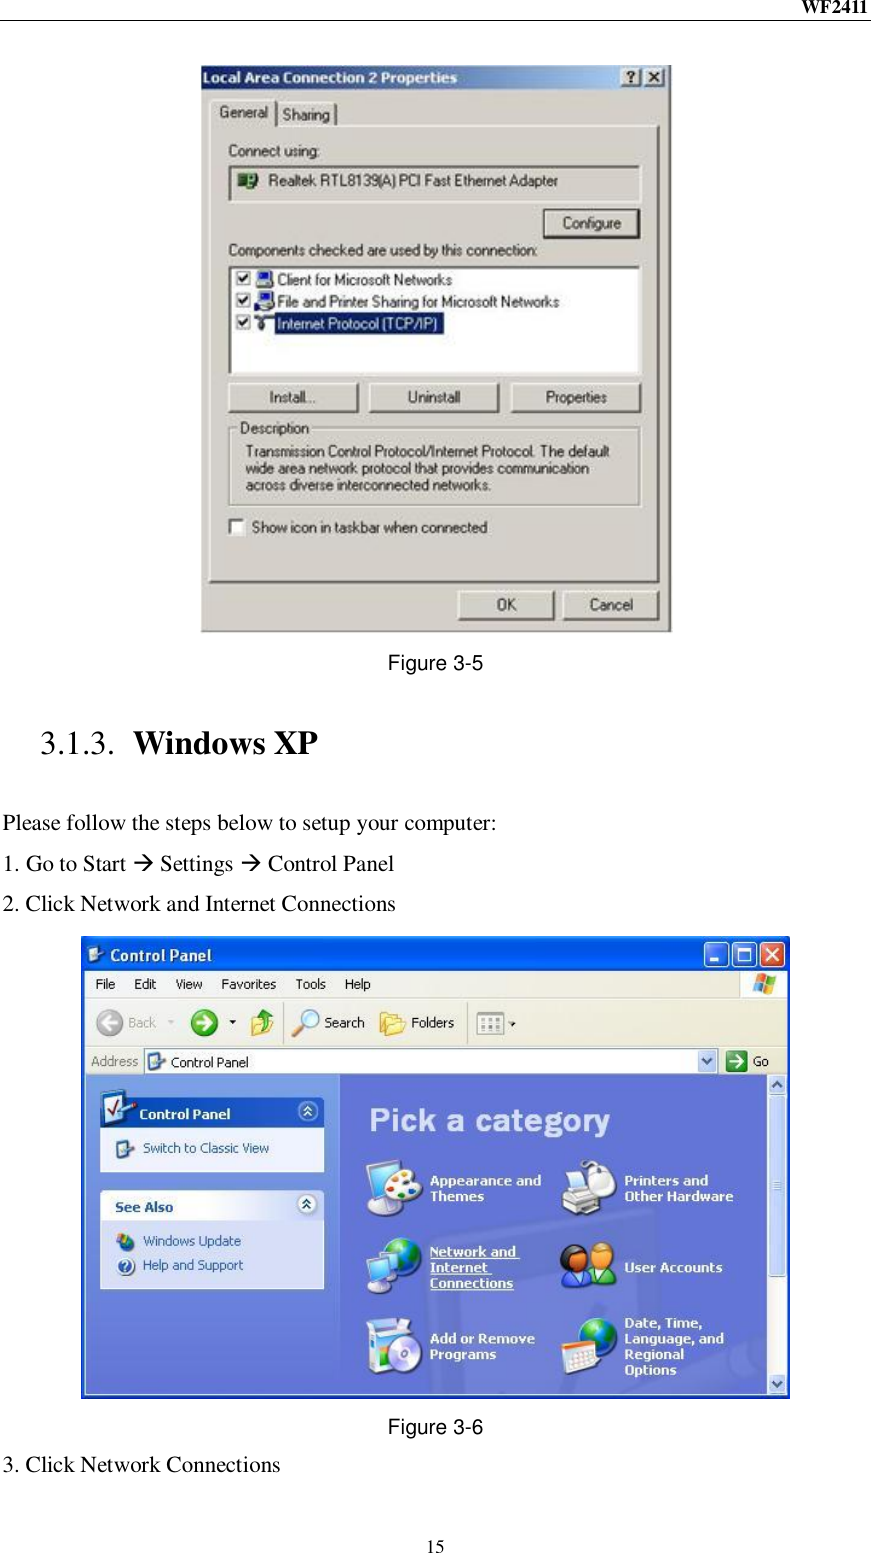 WF2411  15  Figure 3-5 3.1.3. Windows XP Please follow the steps below to setup your computer: 1. Go to Start  Settings  Control Panel 2. Click Network and Internet Connections  Figure 3-6 3. Click Network Connections 